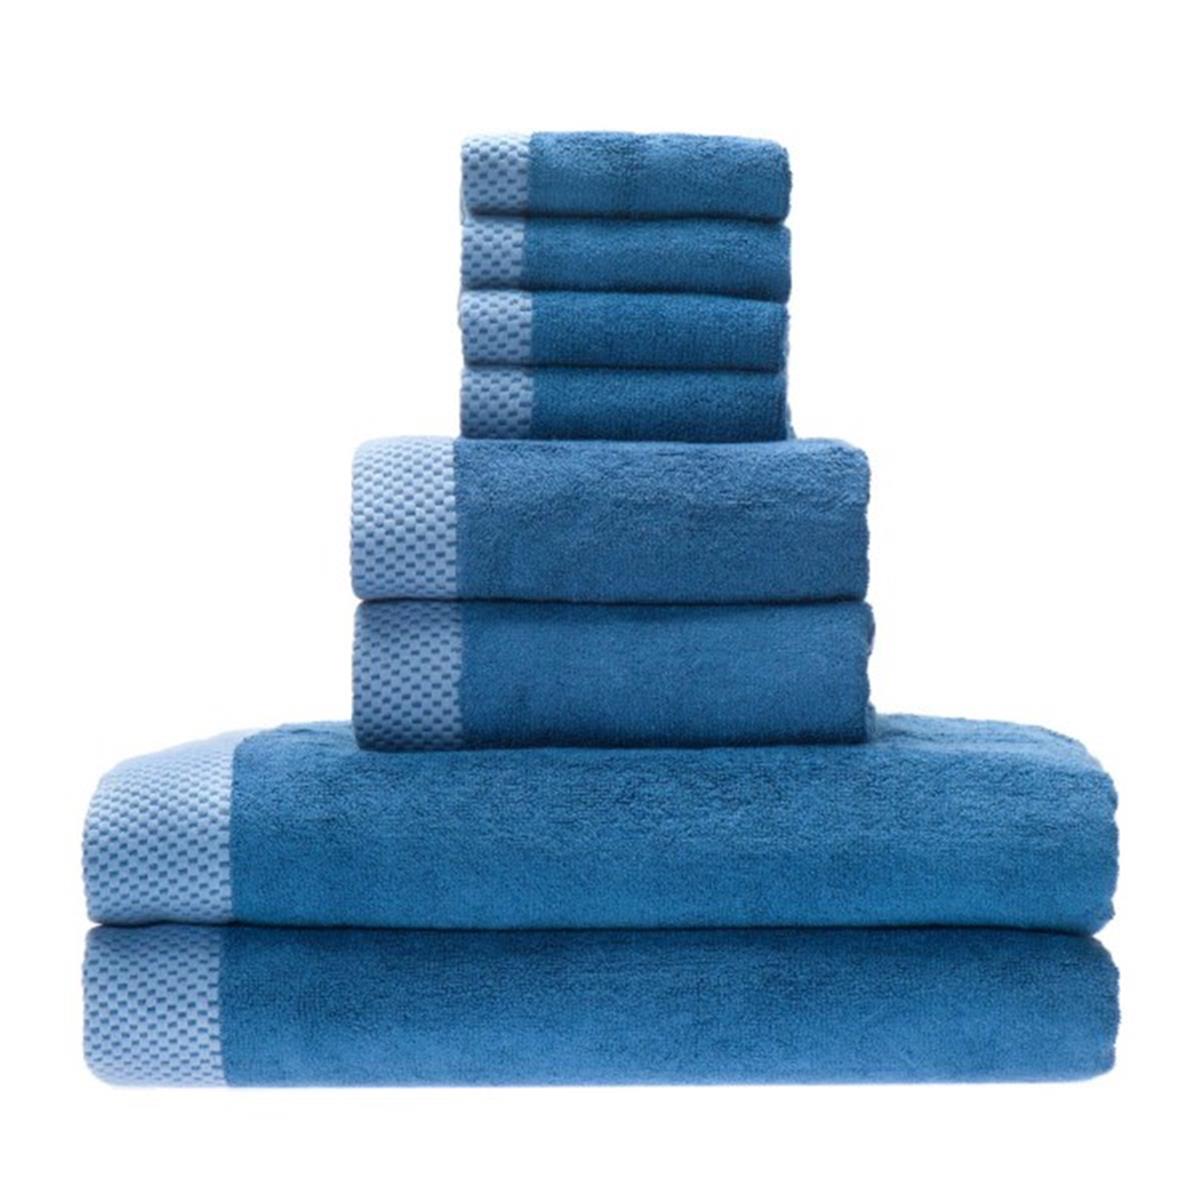 Picture of BedVoyage 21980744 Rayon From Bamboo Blend Resort Towel Bundle, Indigo